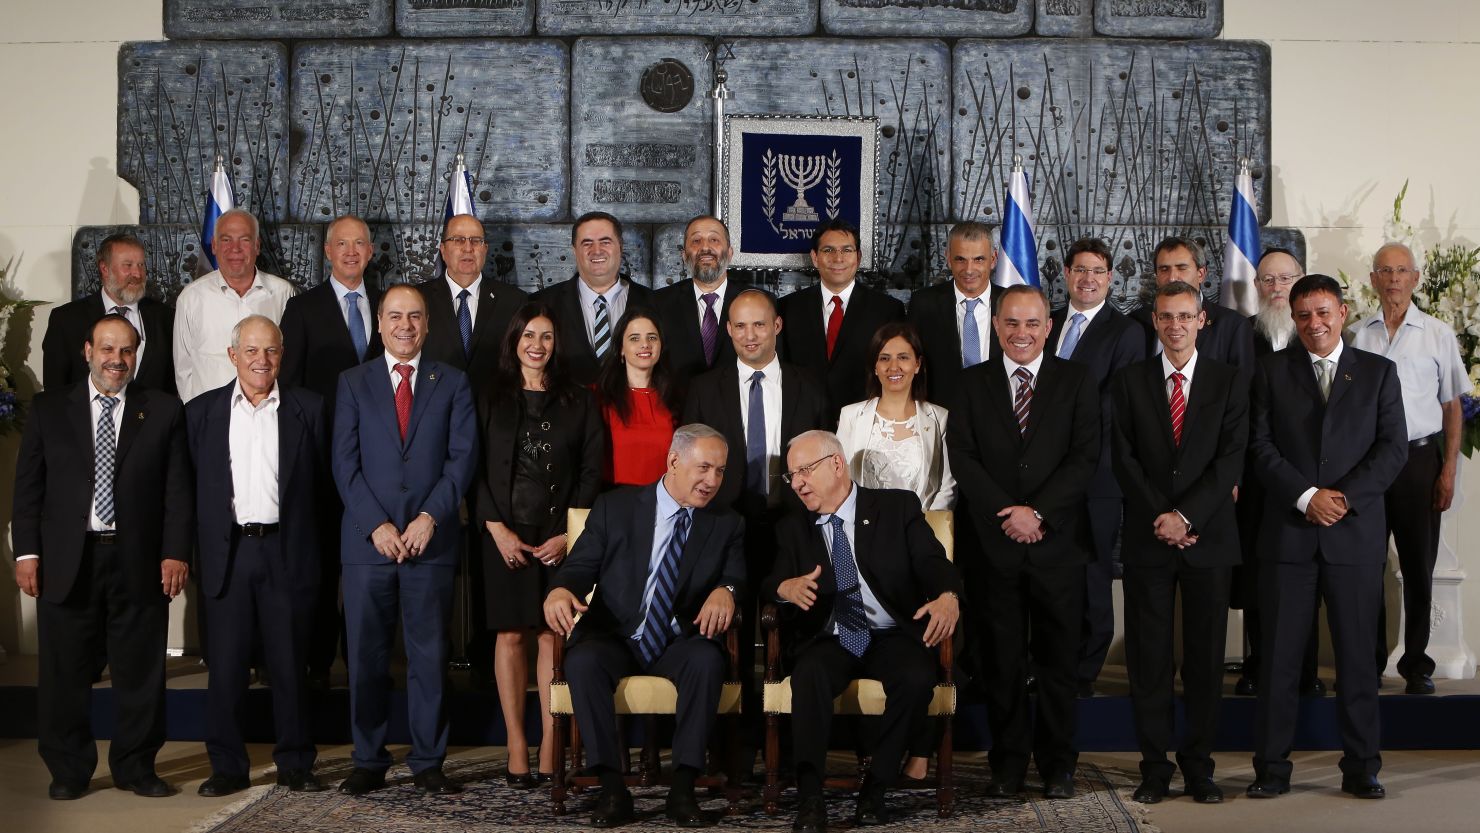 Israel's Minister for Social Equality Gila Gamliel (middle row, seventh from left) says she has been sexually harassed in the past. 


